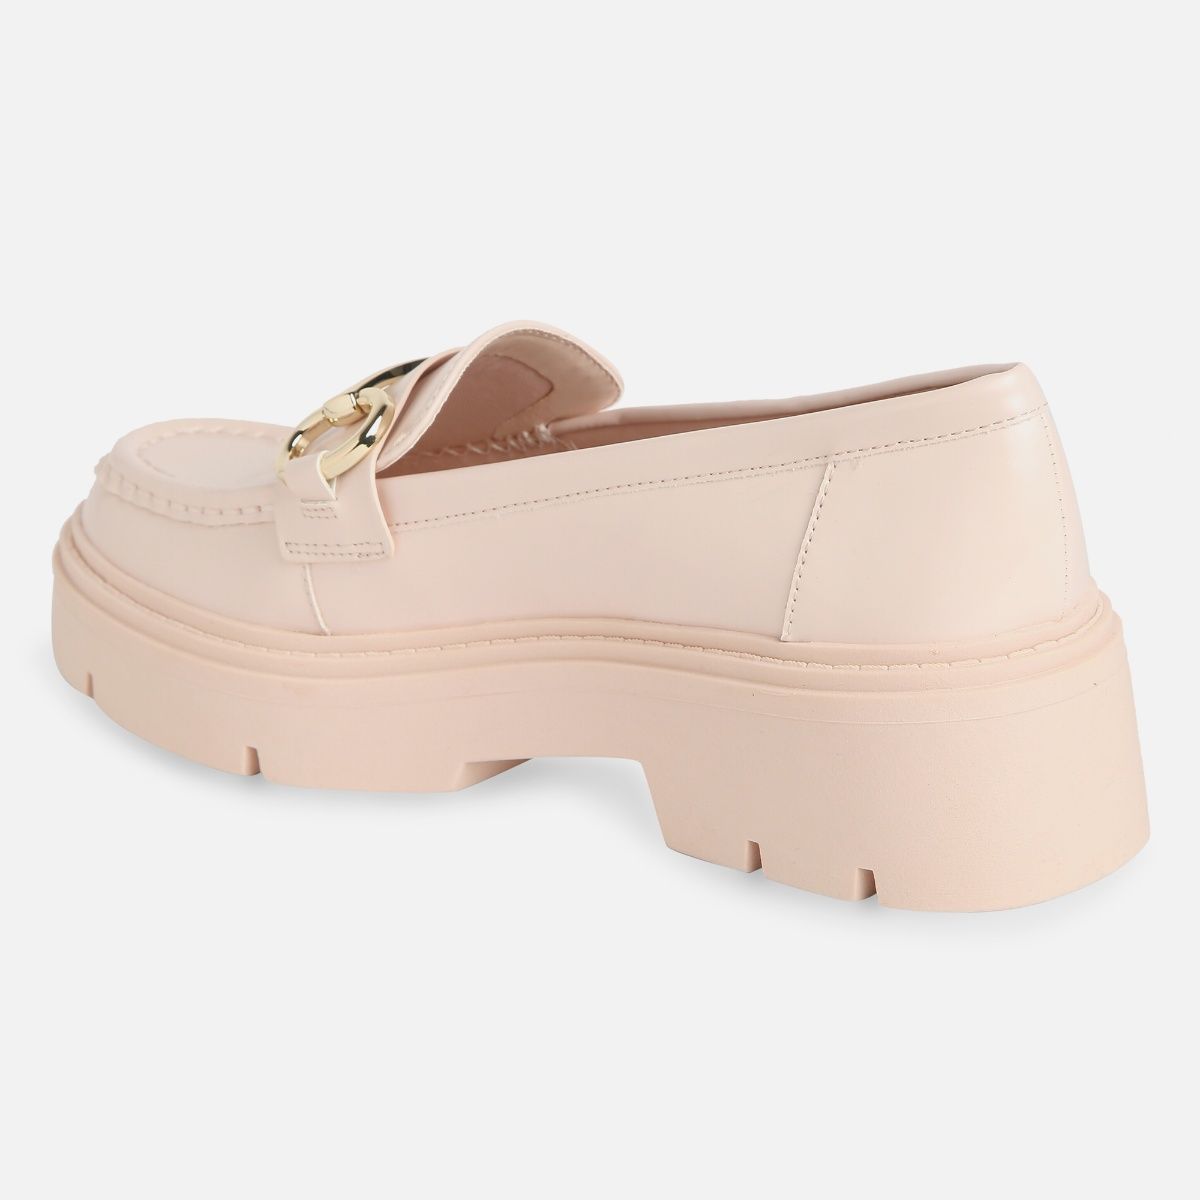 Aldo Miska Synthetic Pink Solid Loafers: Buy Aldo Miska Synthetic Pink ...